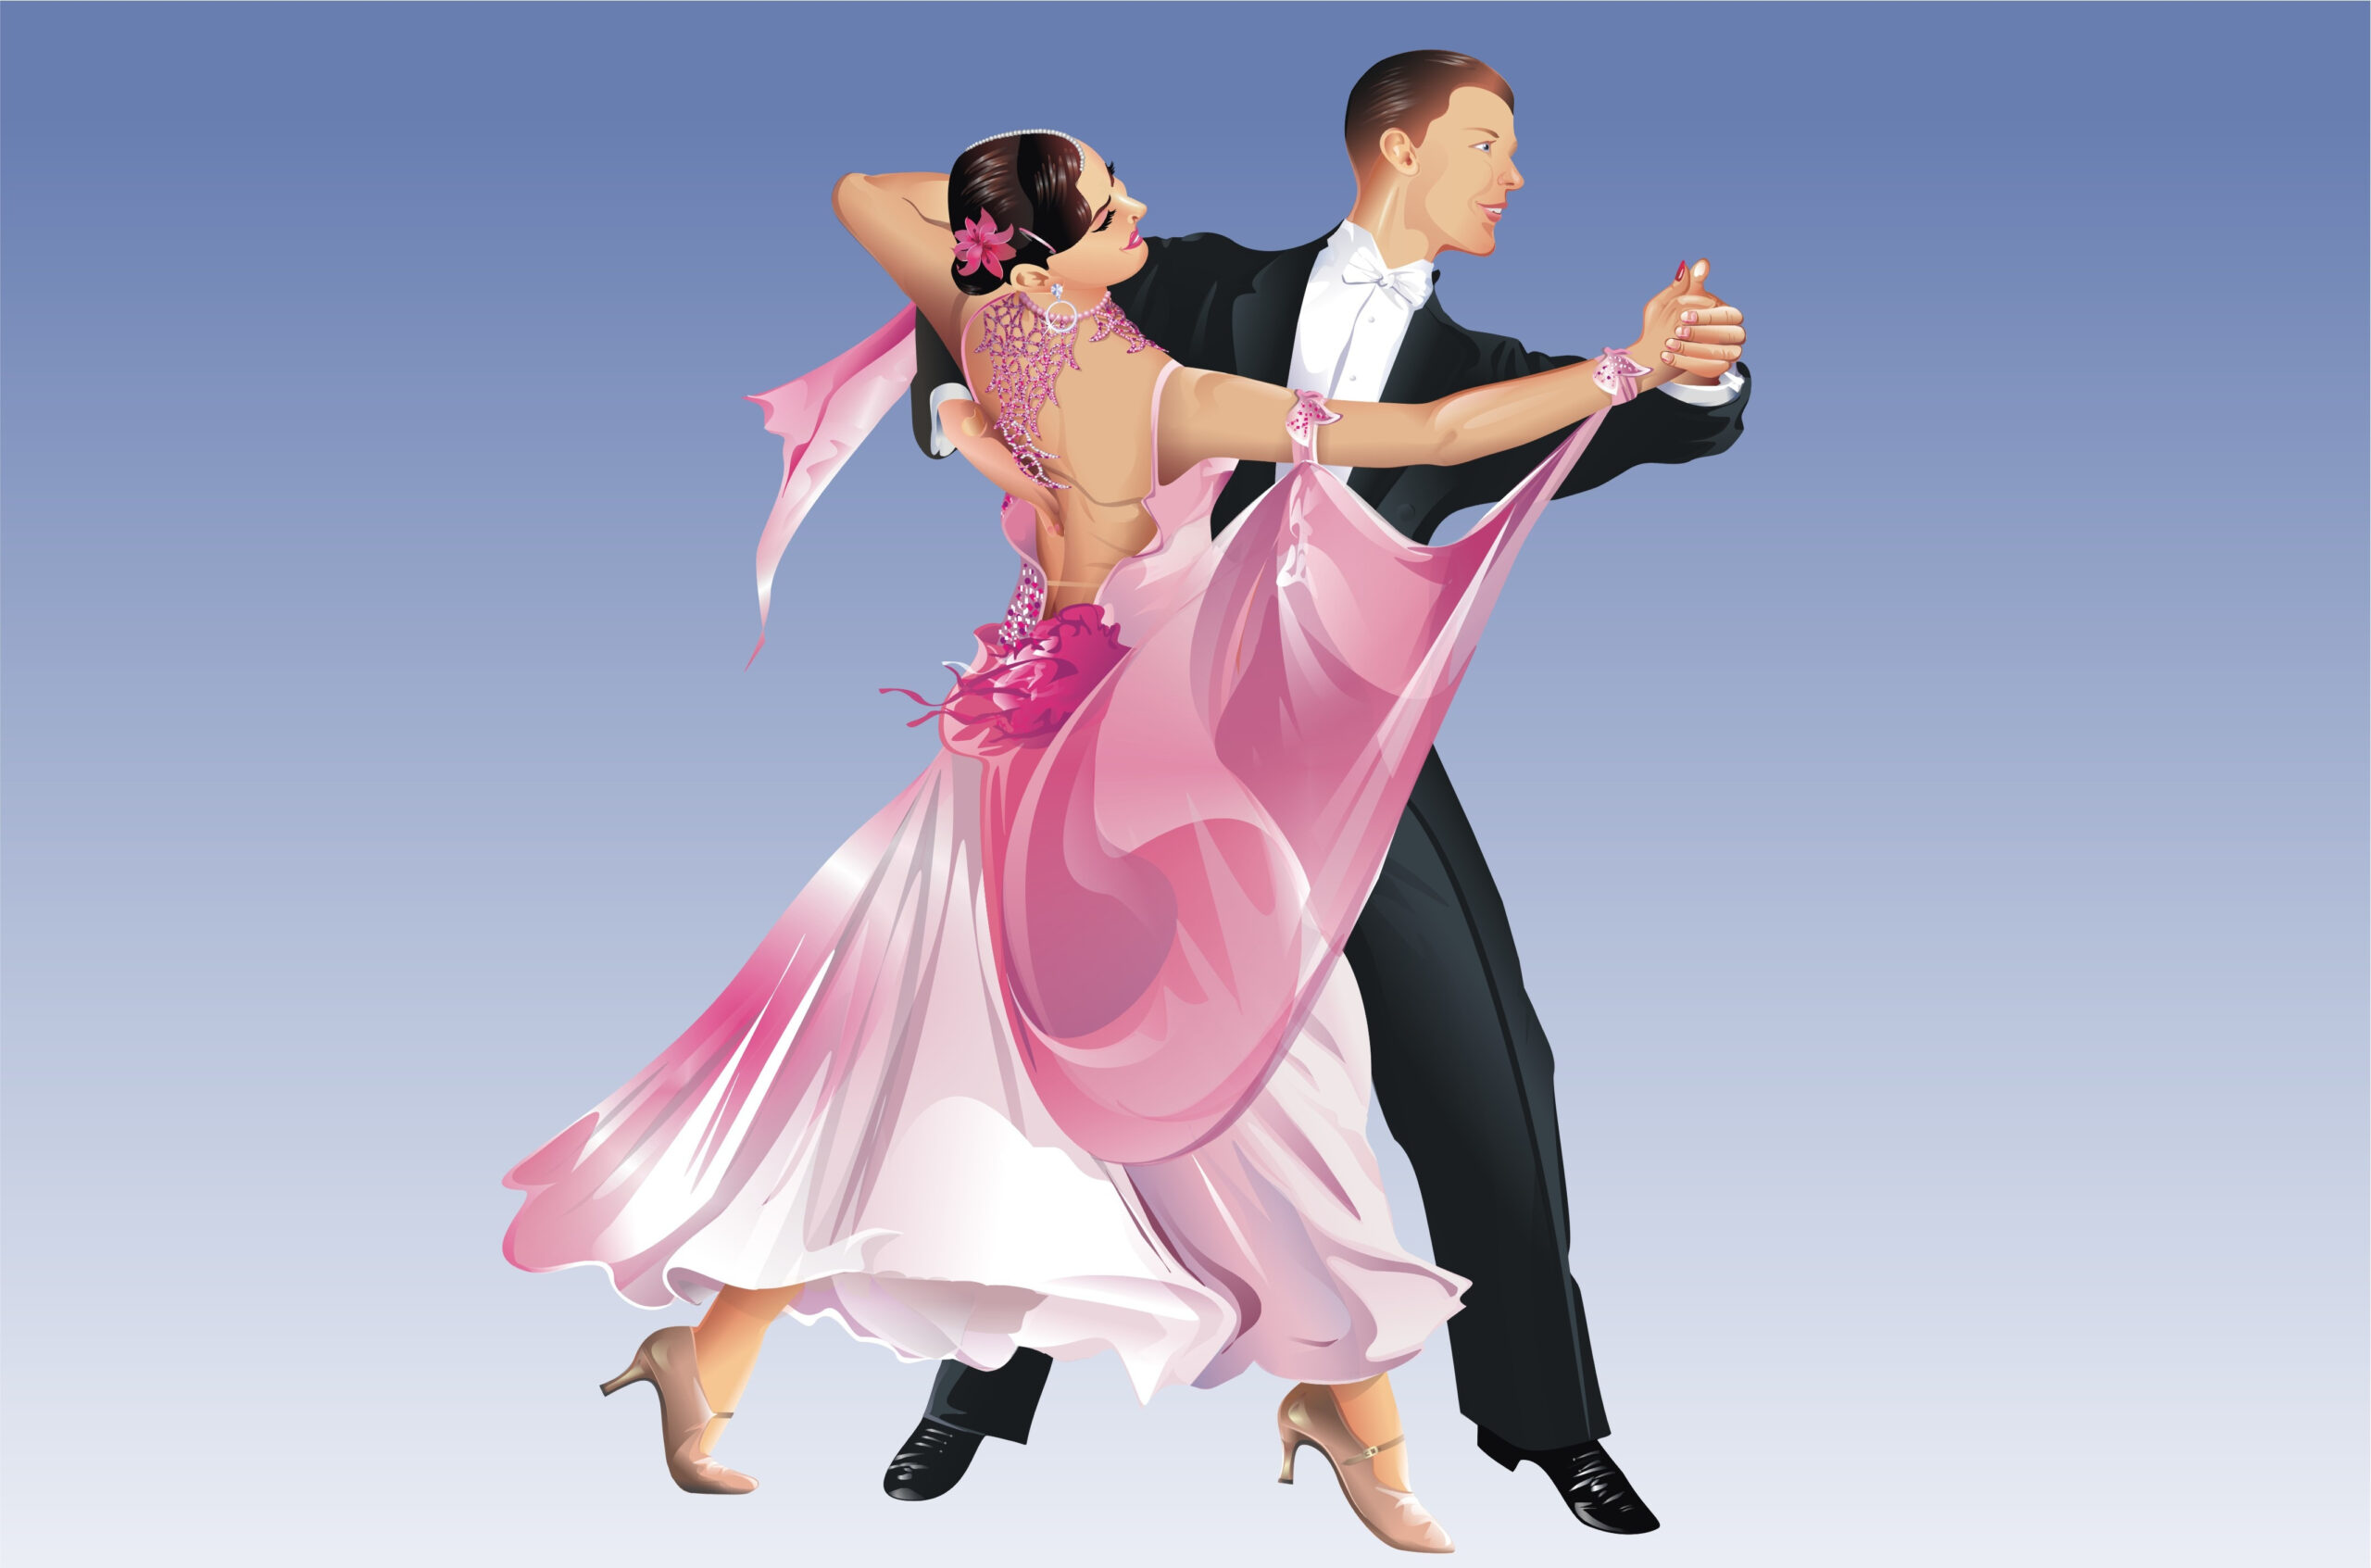 The Salsa With Silvia dance studio offers American Smooth and American Rhythm Ballroom dance private lessons for students of all levels. Learn cha cha, rumba, swing, Waltz, Tango and Foxtrot with expert instructors certified with the National Dance Council of America